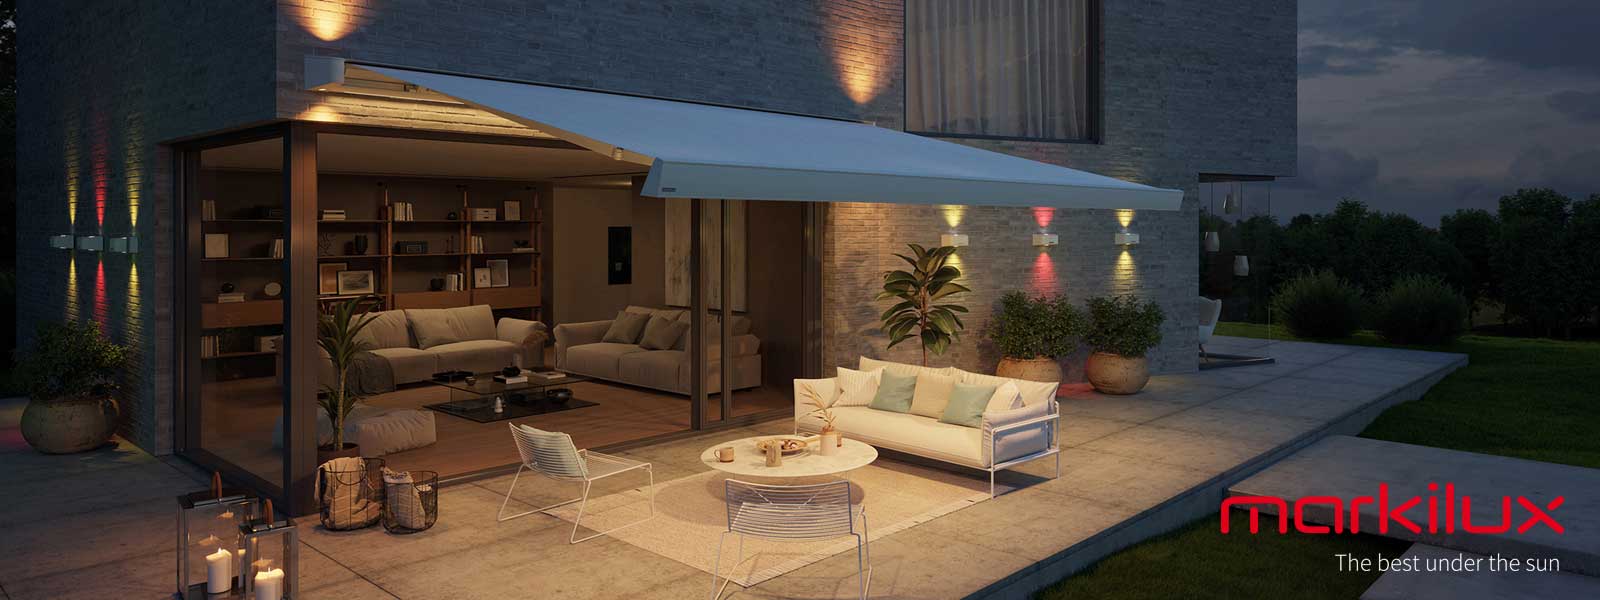 Markilux MX-4 awnings from Brite Blinds